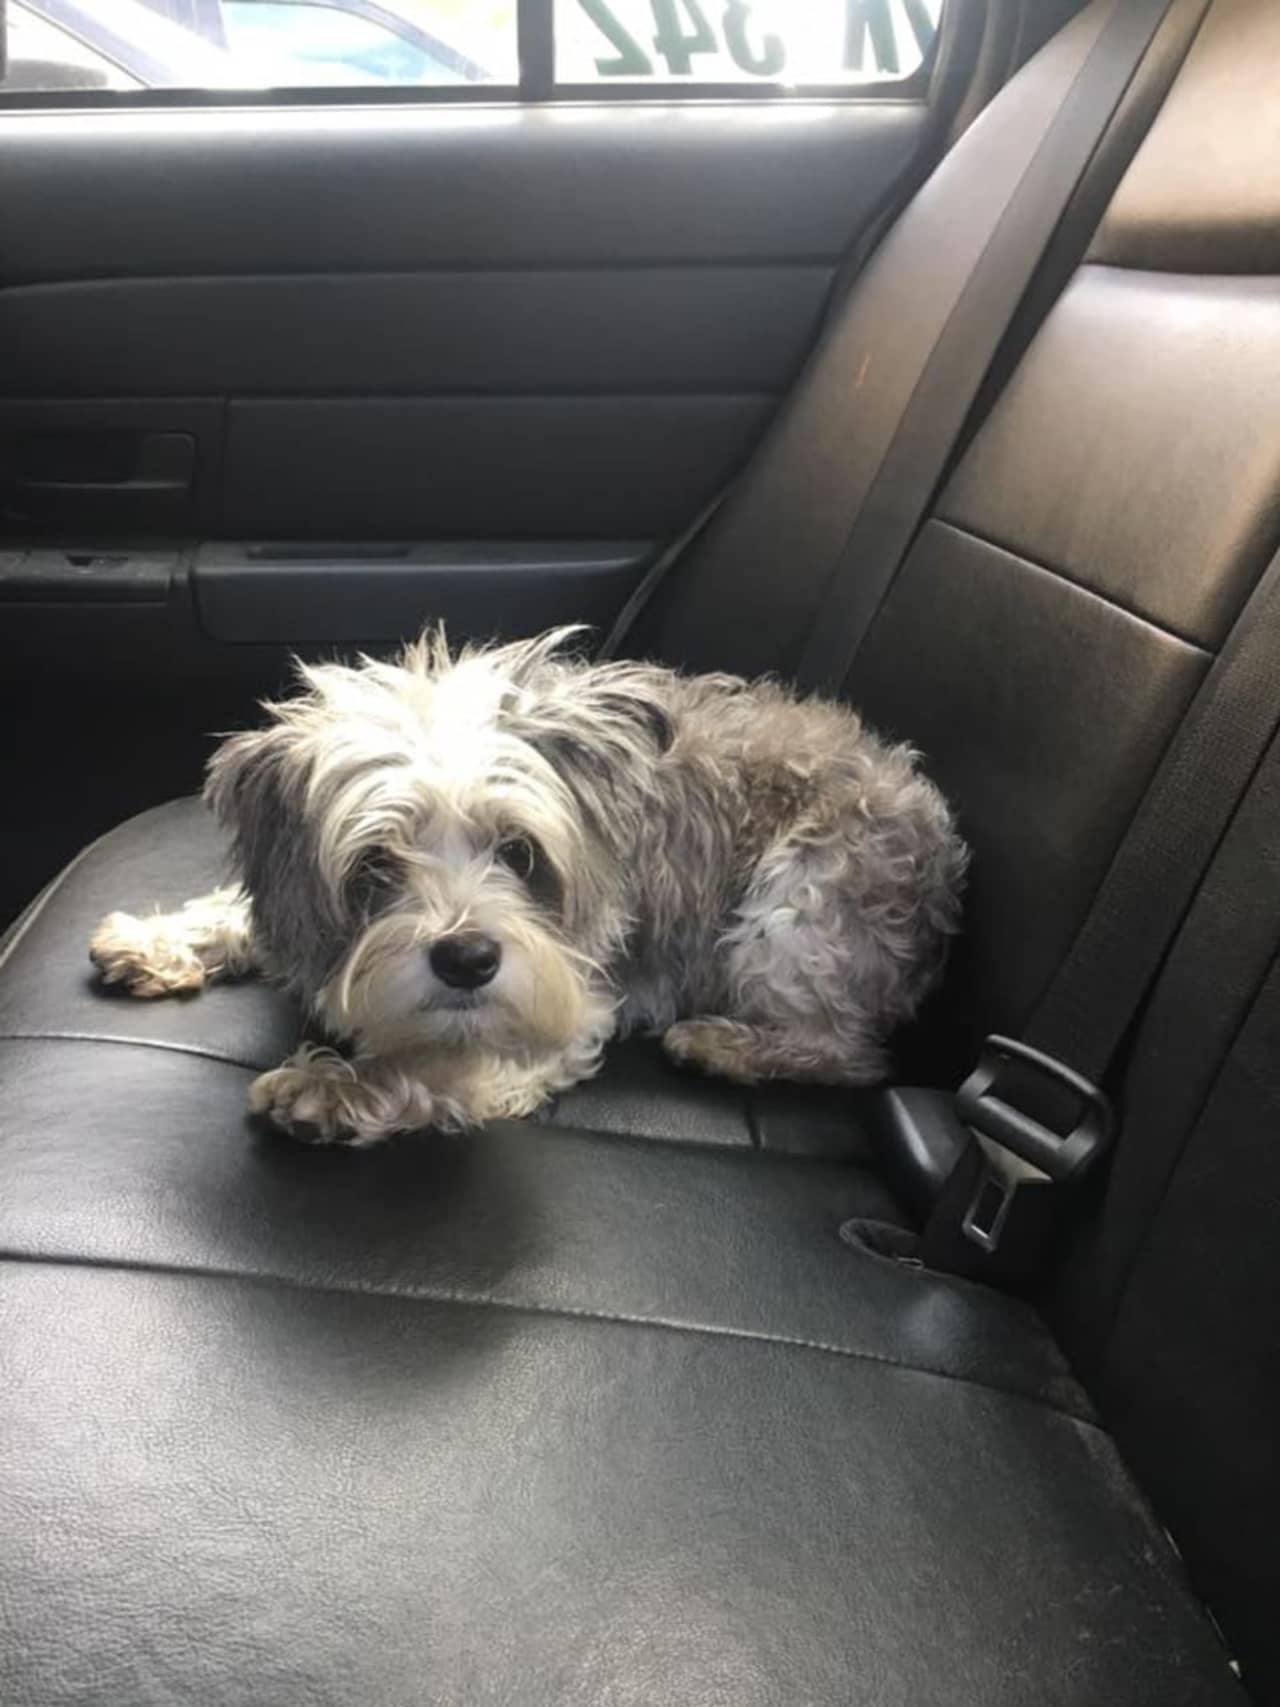 This little doggie was found Tuesday wandering around Adams Hill Road in Lewisboro.